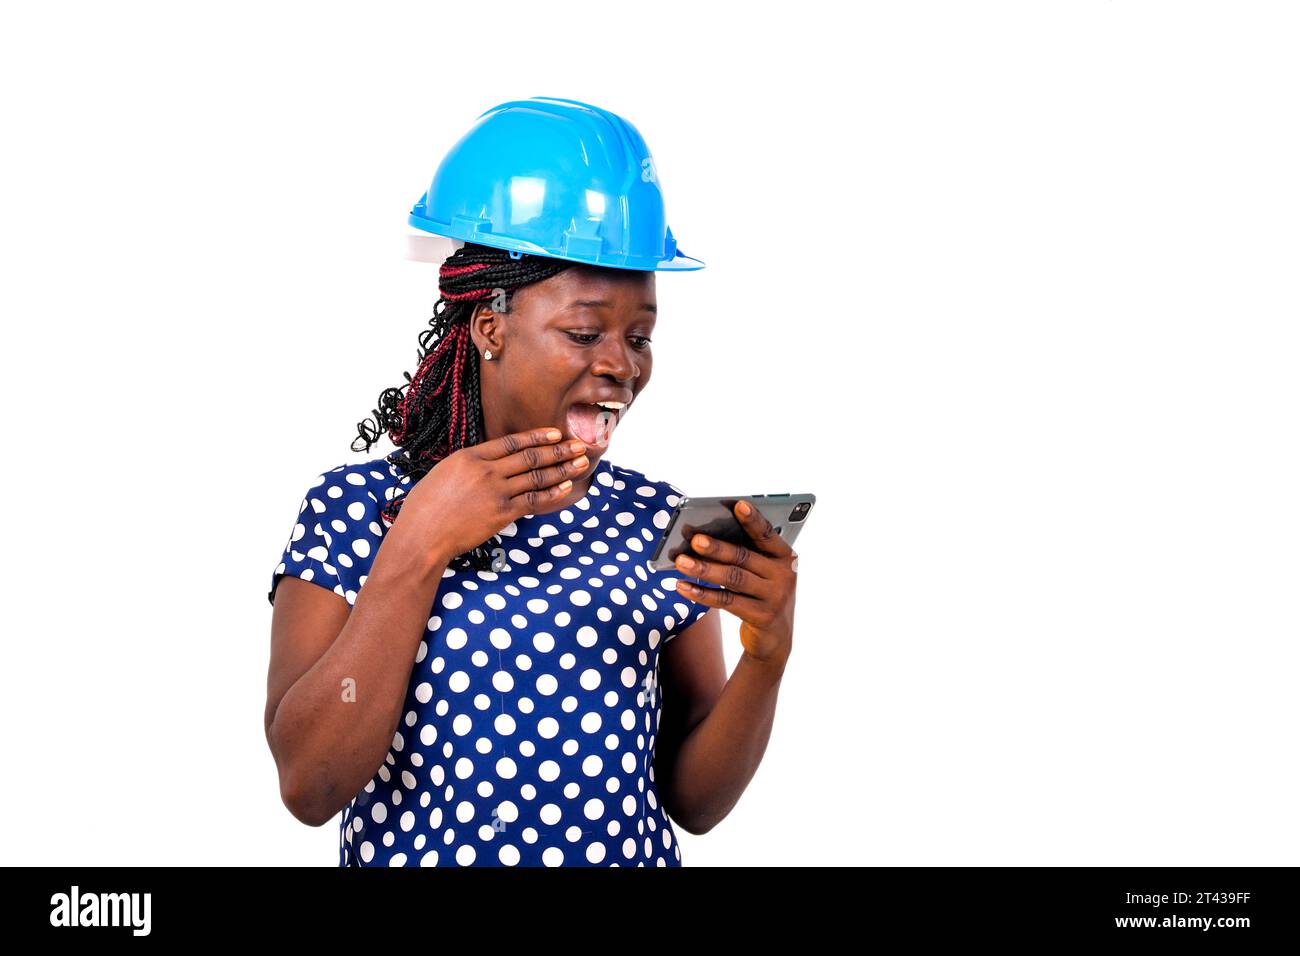 young female engineer wearing blue safety helmet surprised and watching video on mobile phone while smiling. Stock Photo